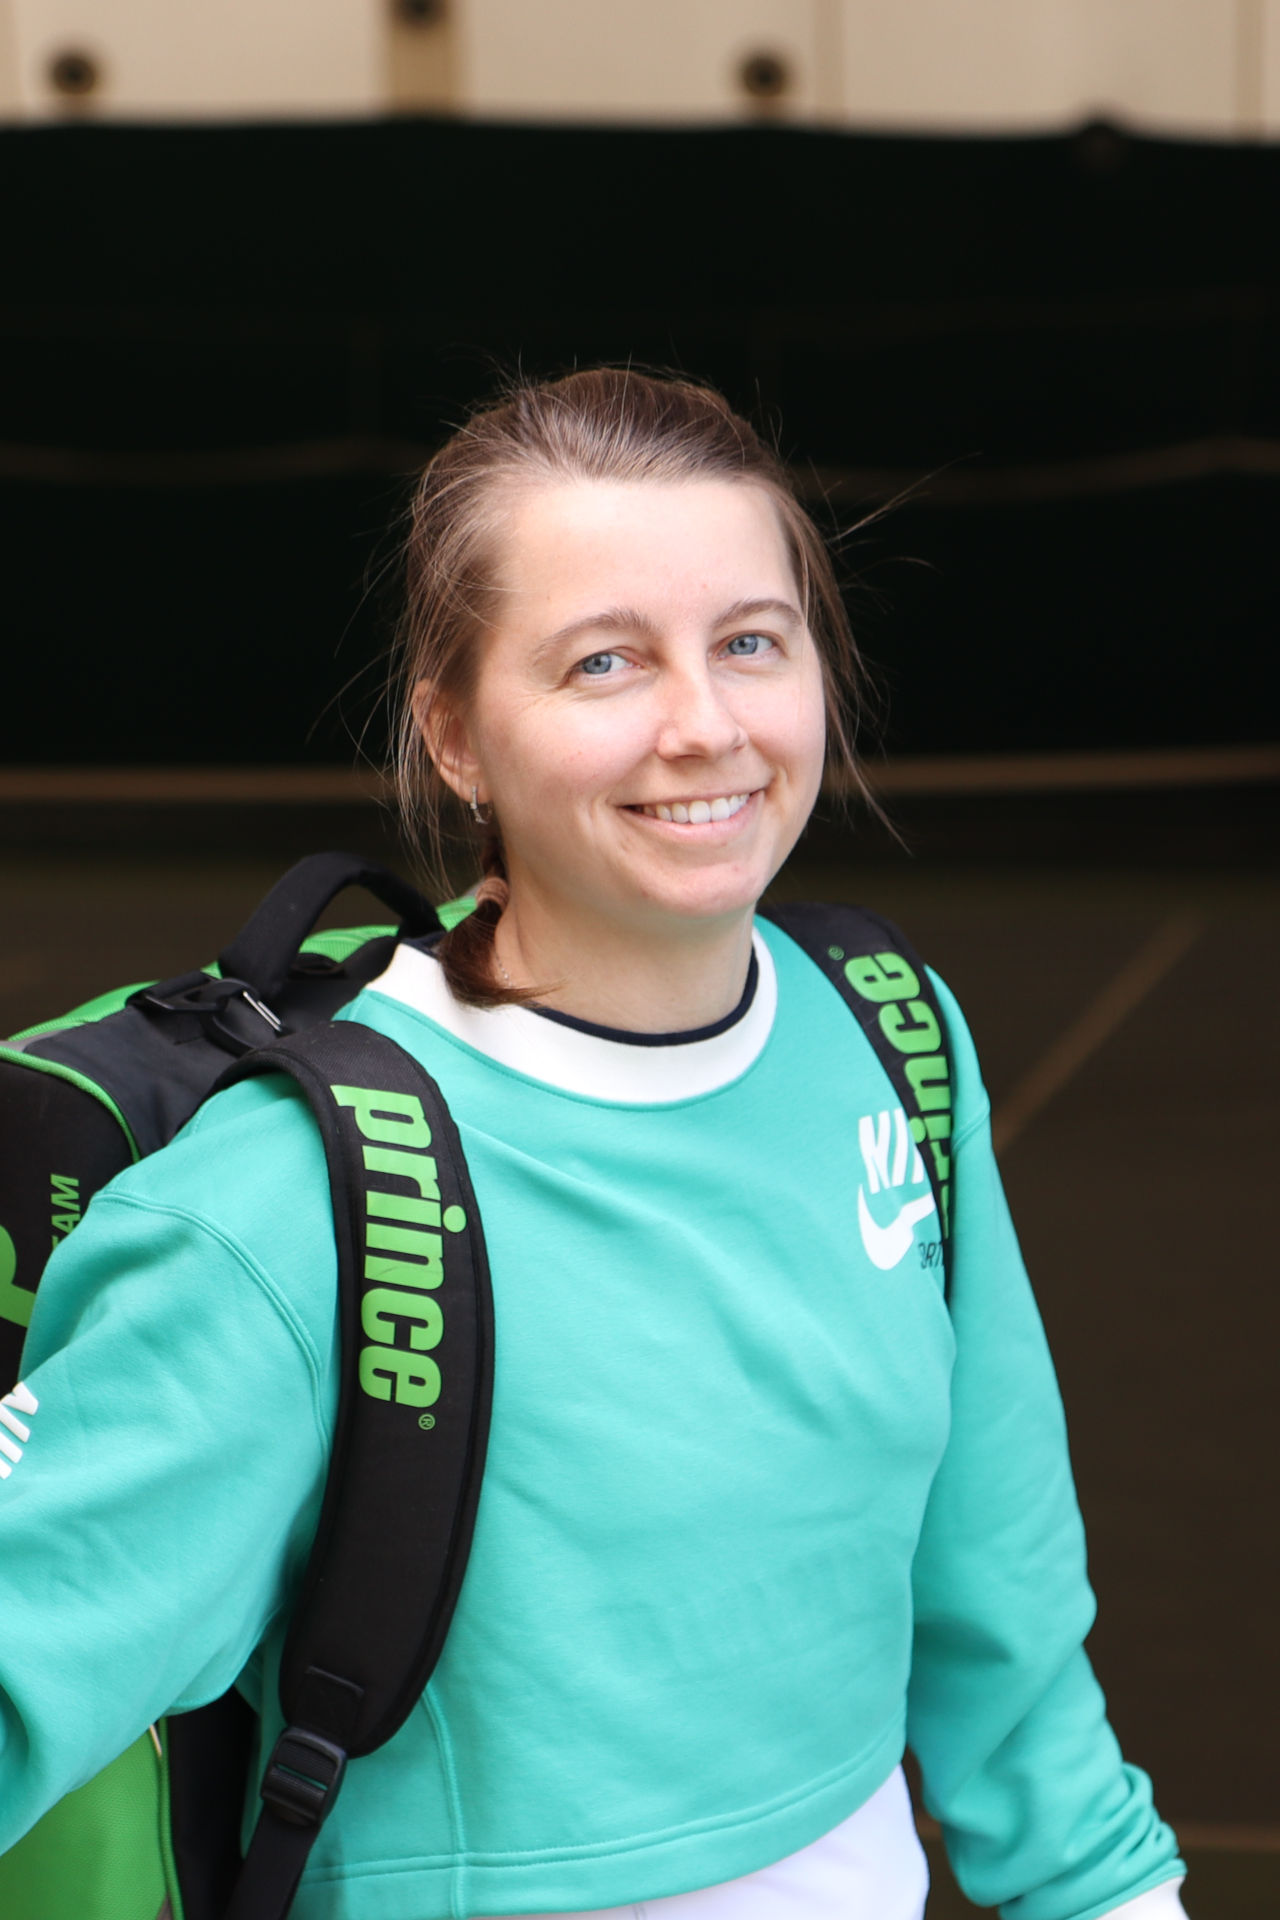 Elena, the player behind Road To Smarter Tennis Program